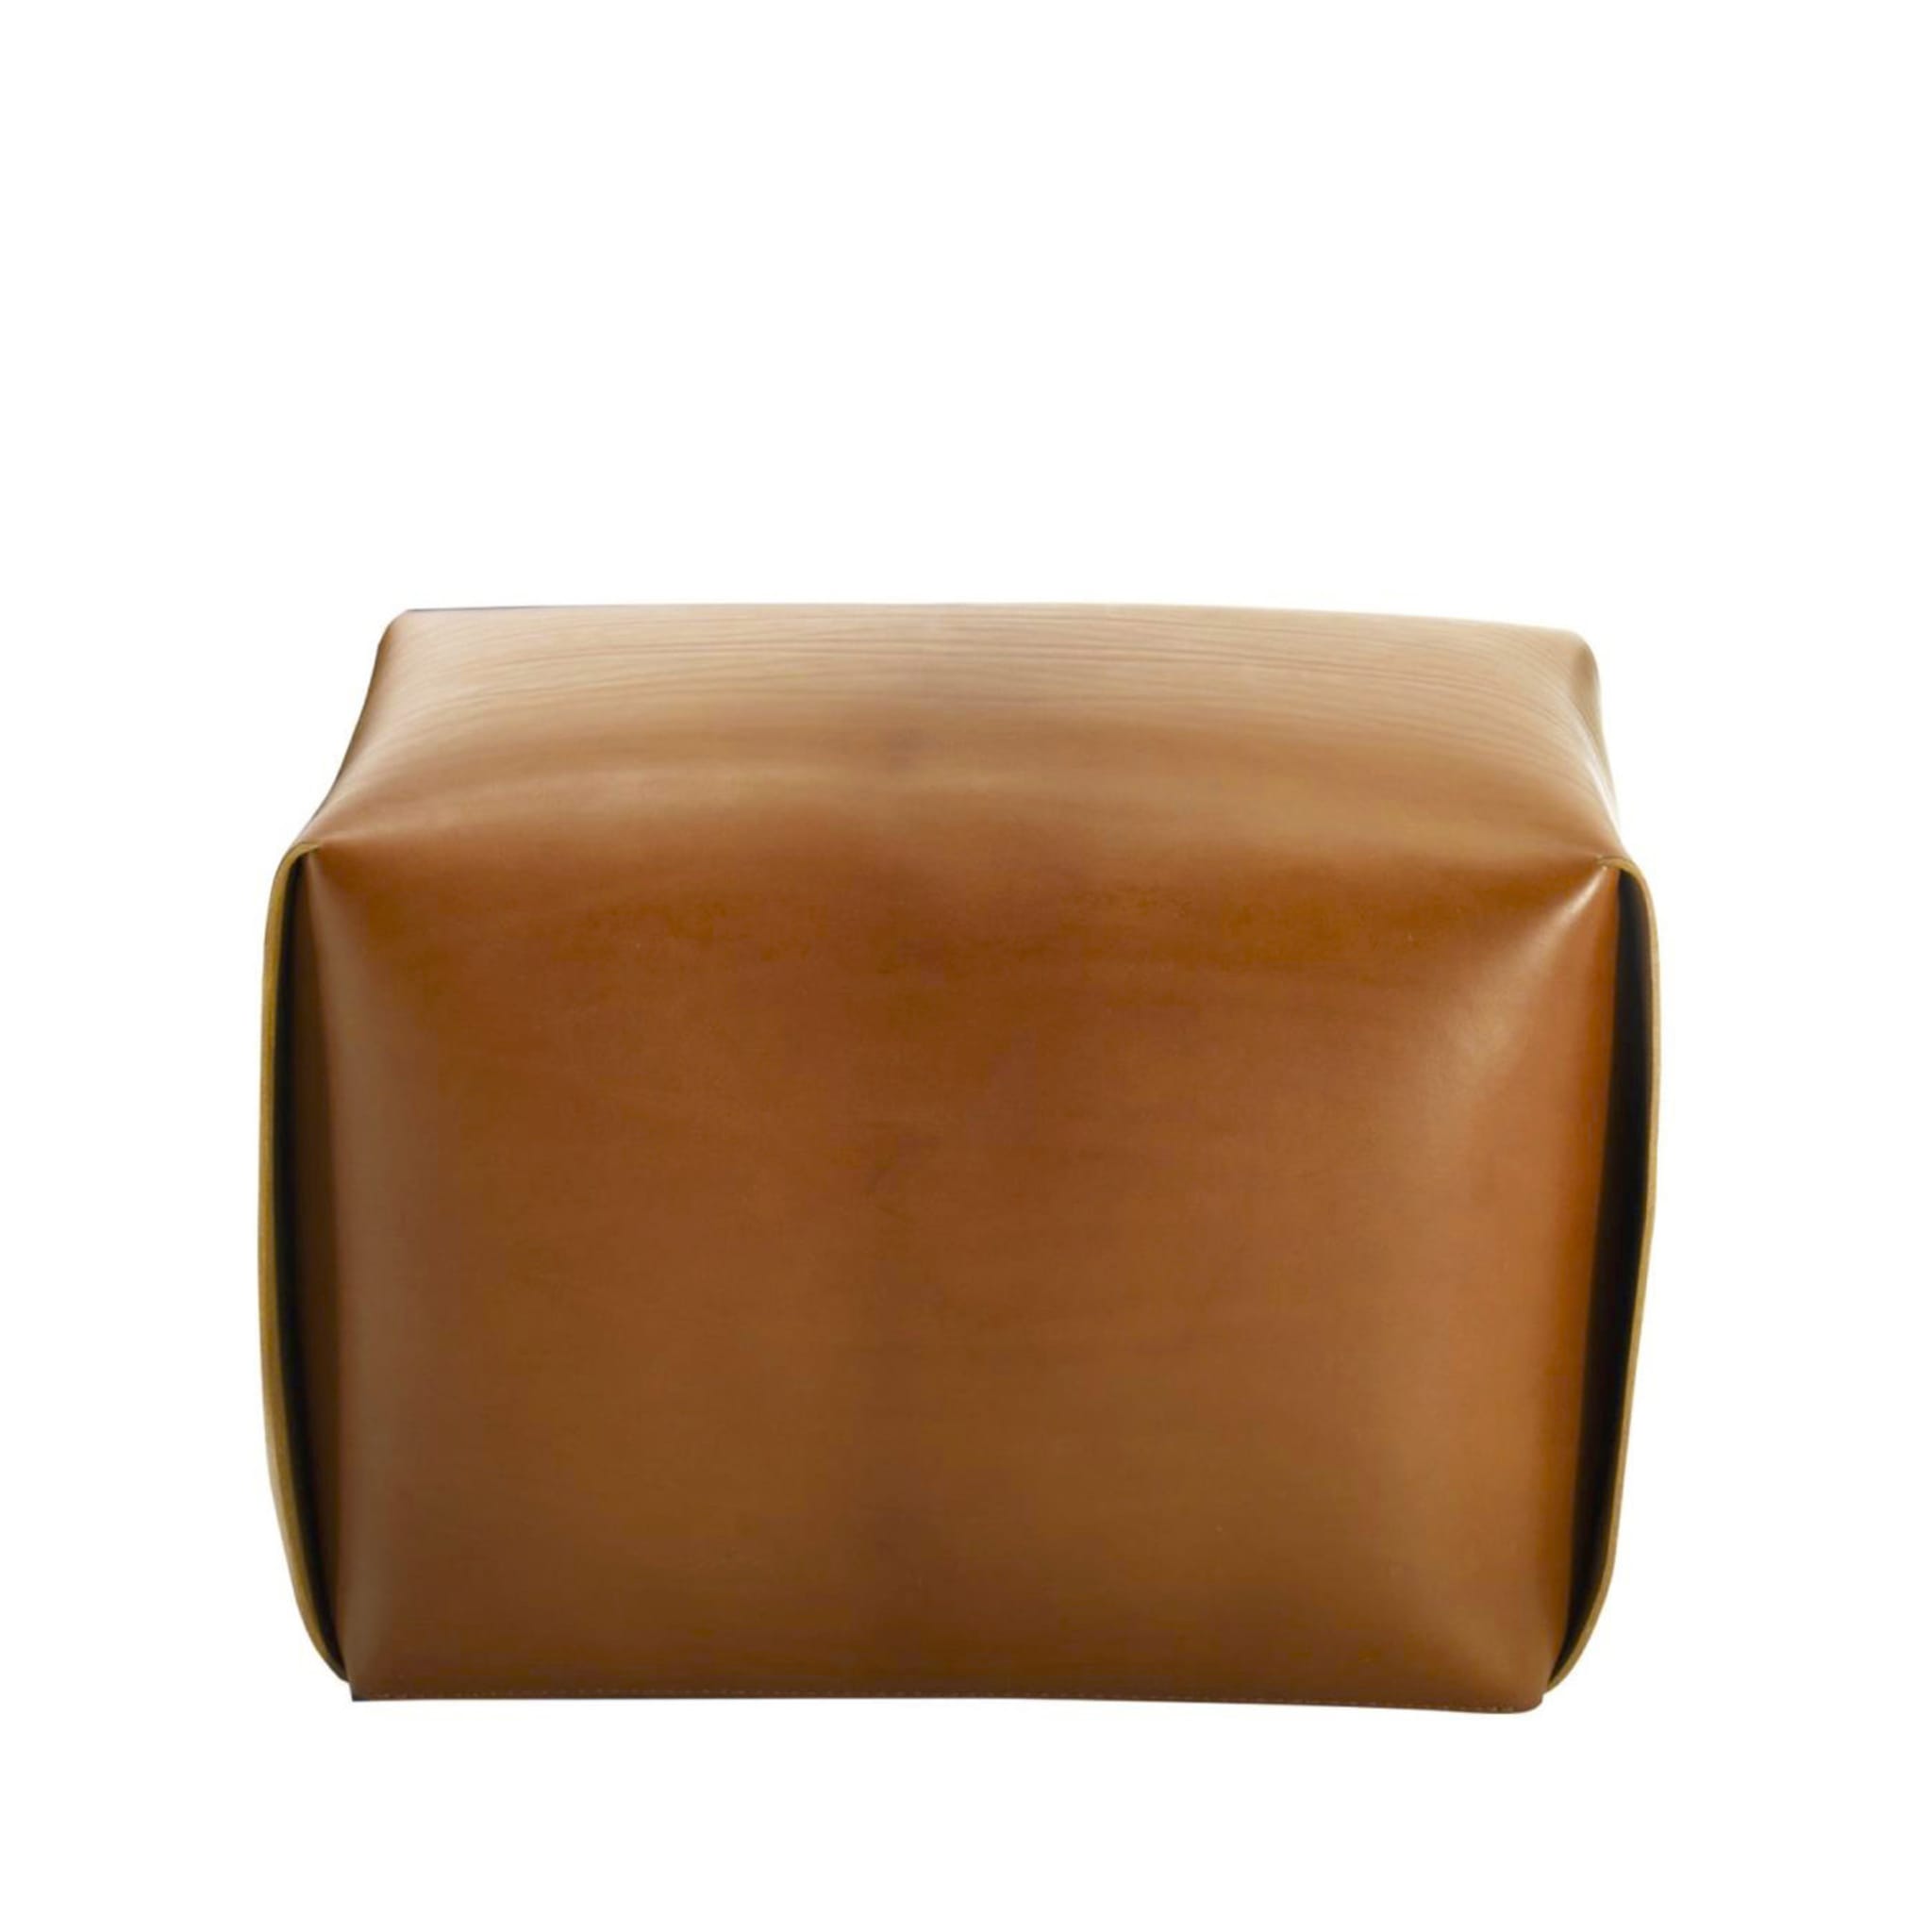 Bao Light-Brown Leather Pouf ☞ Seat: Frosted Leather